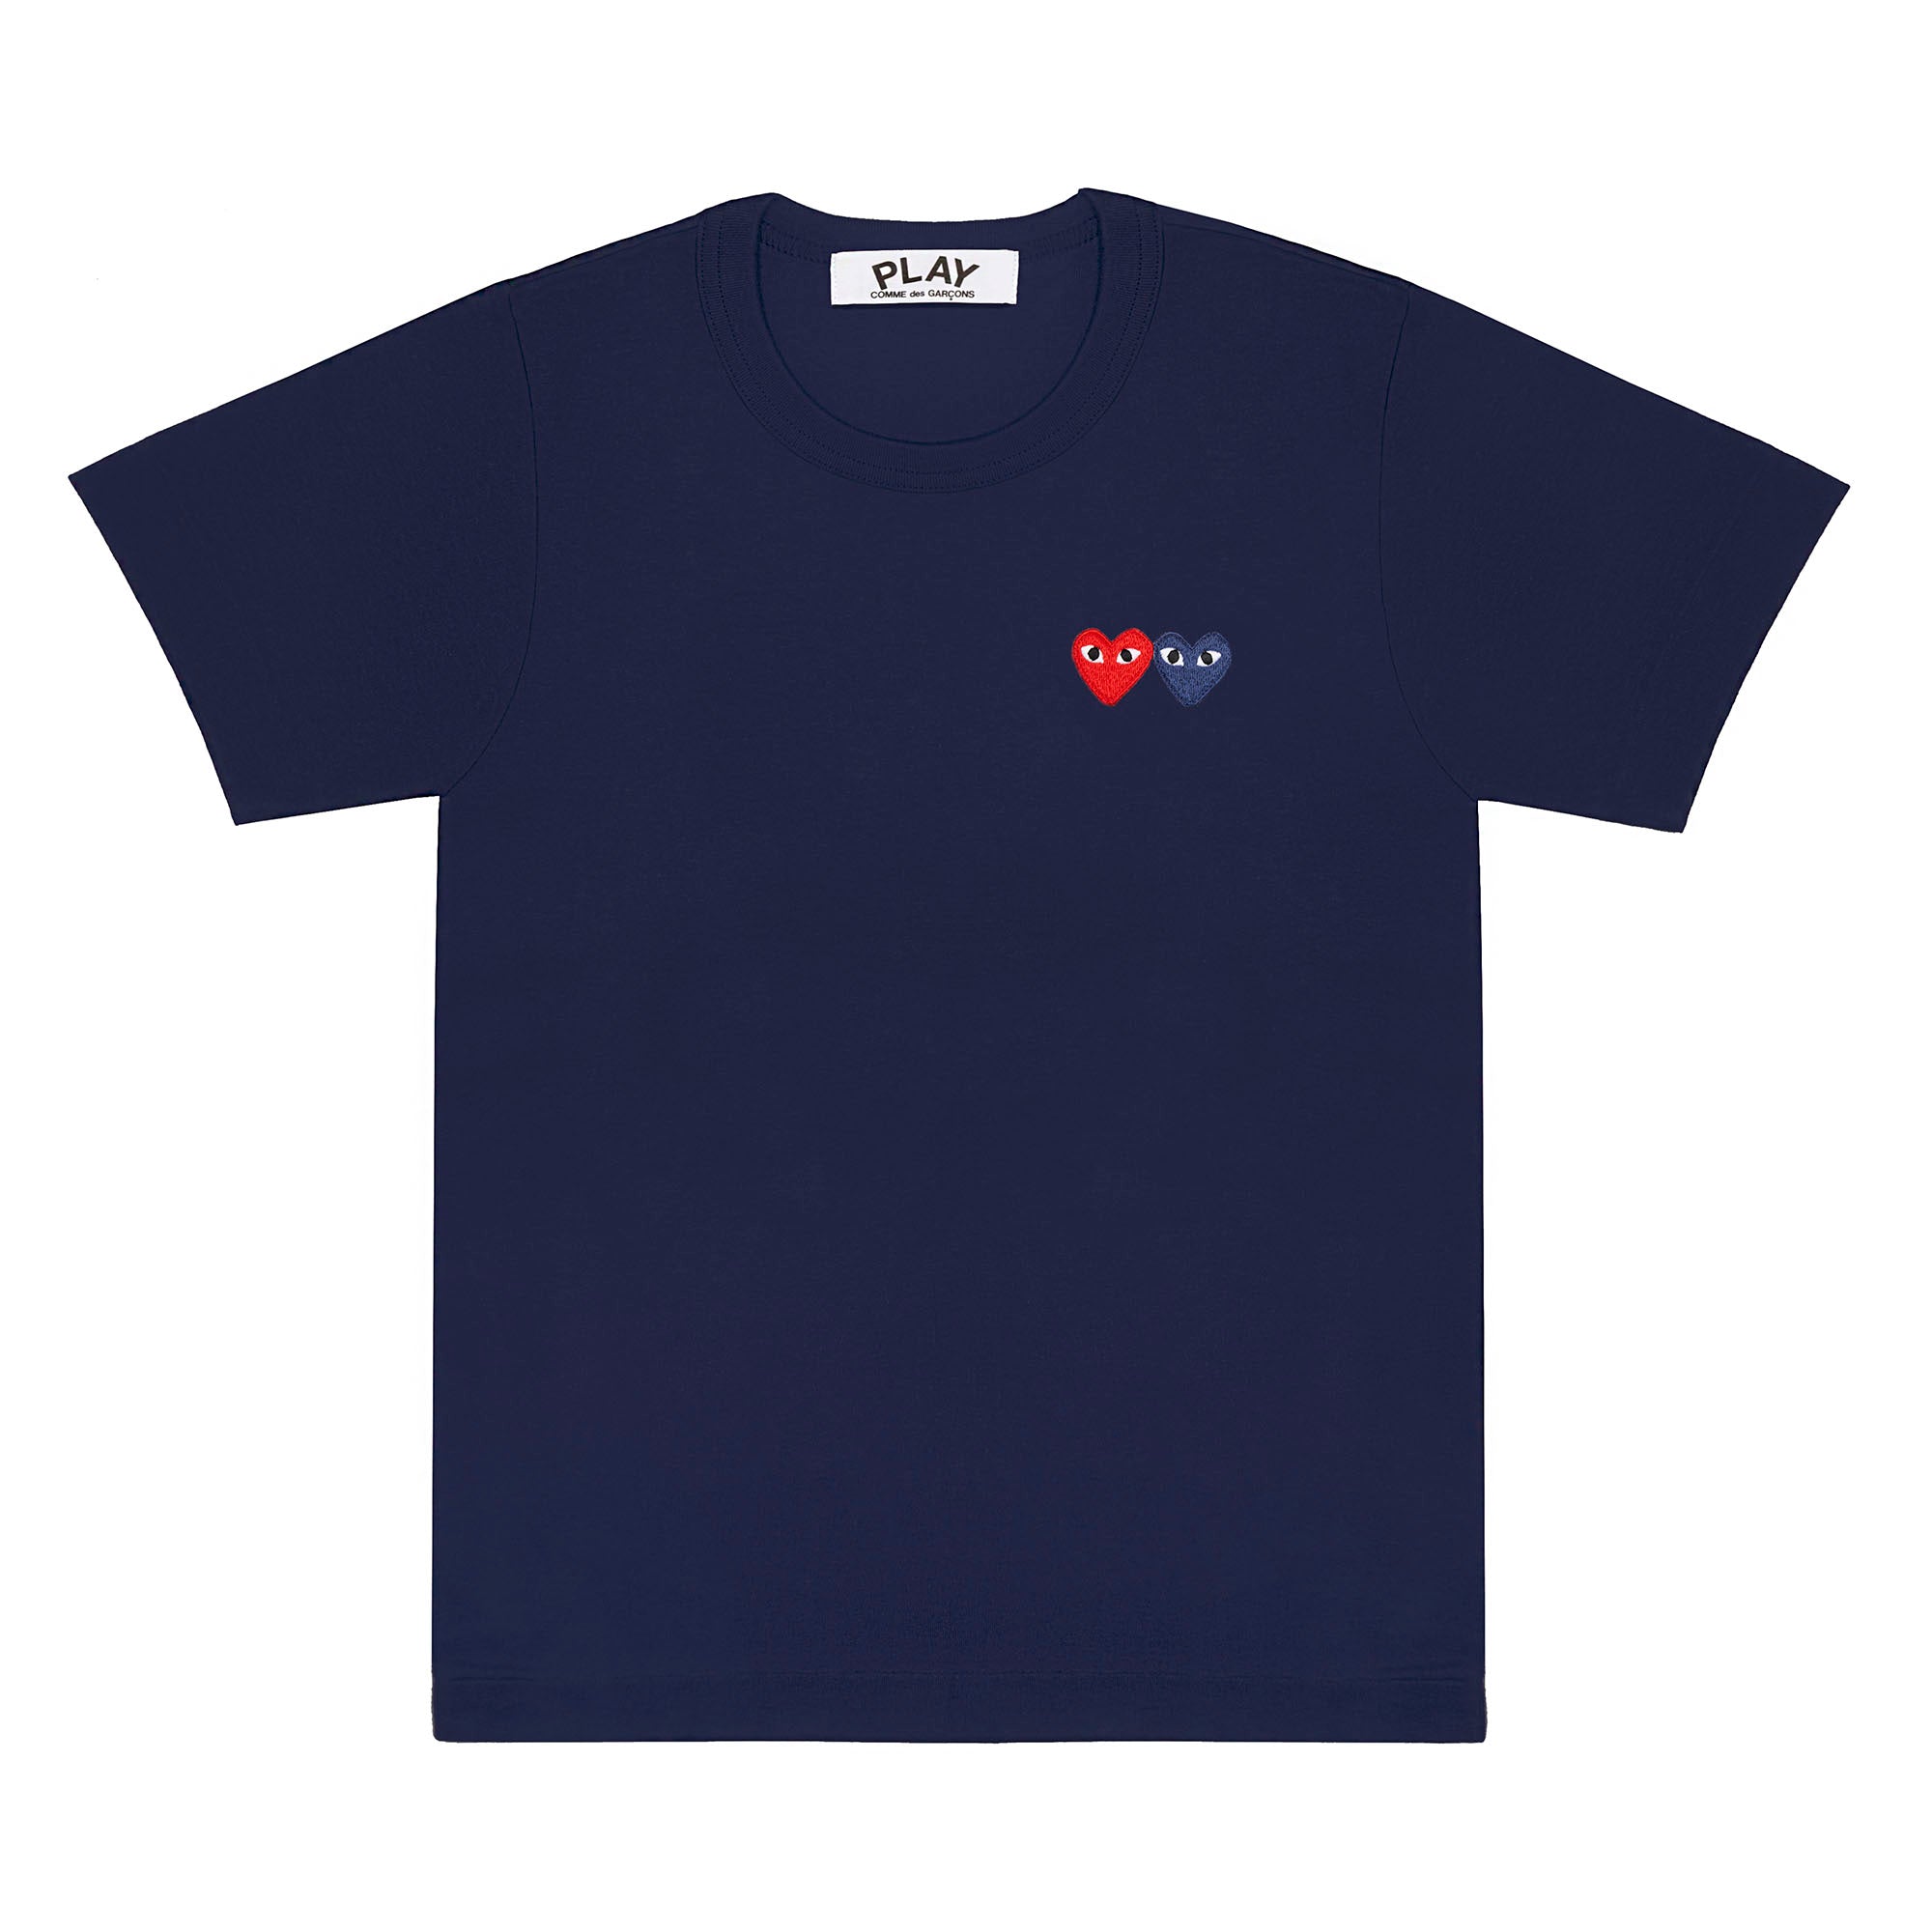 Play Comme des Garçons - T-Shirt with Double Heart - (Navy) view 1